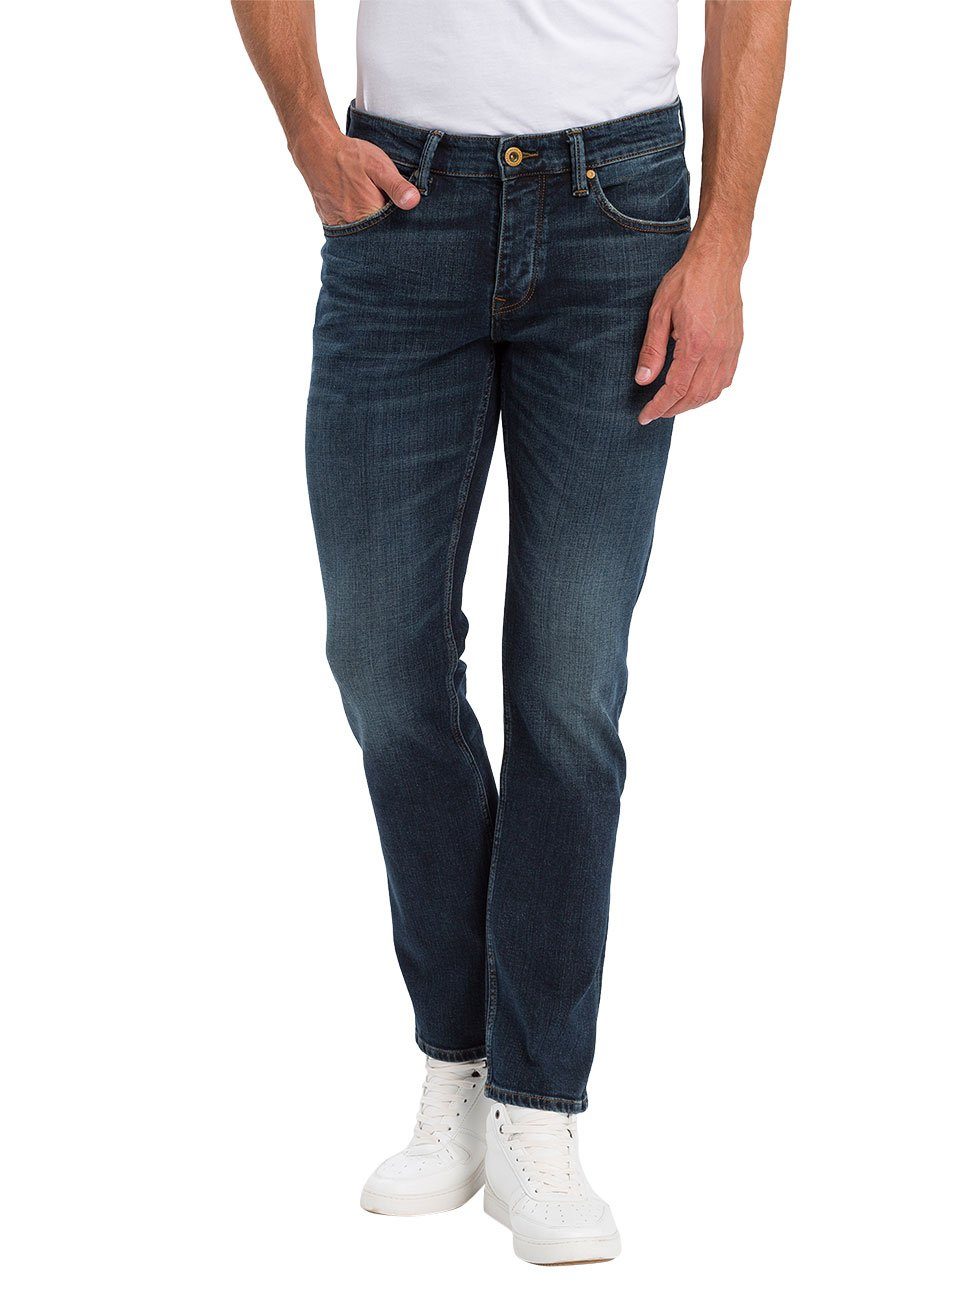 CROSS JEANS® Straight-Jeans Dylan Jeanshose mit Stretch | Straight-Fit Jeans